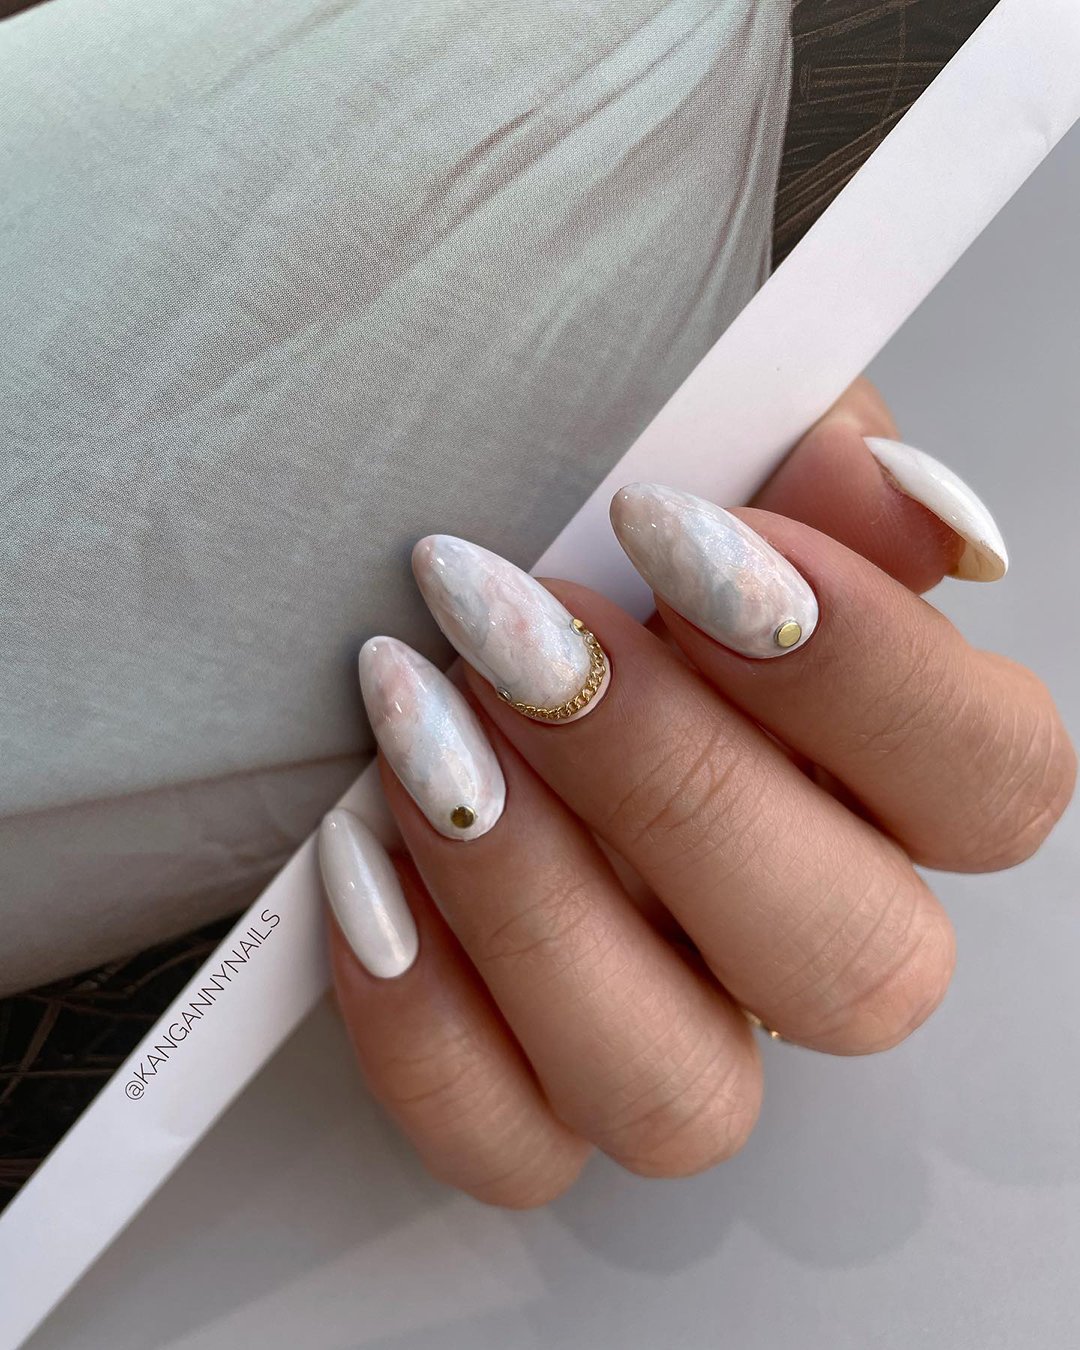 pinterest nails for wedding minimalistic marble with golden touch kangannynails